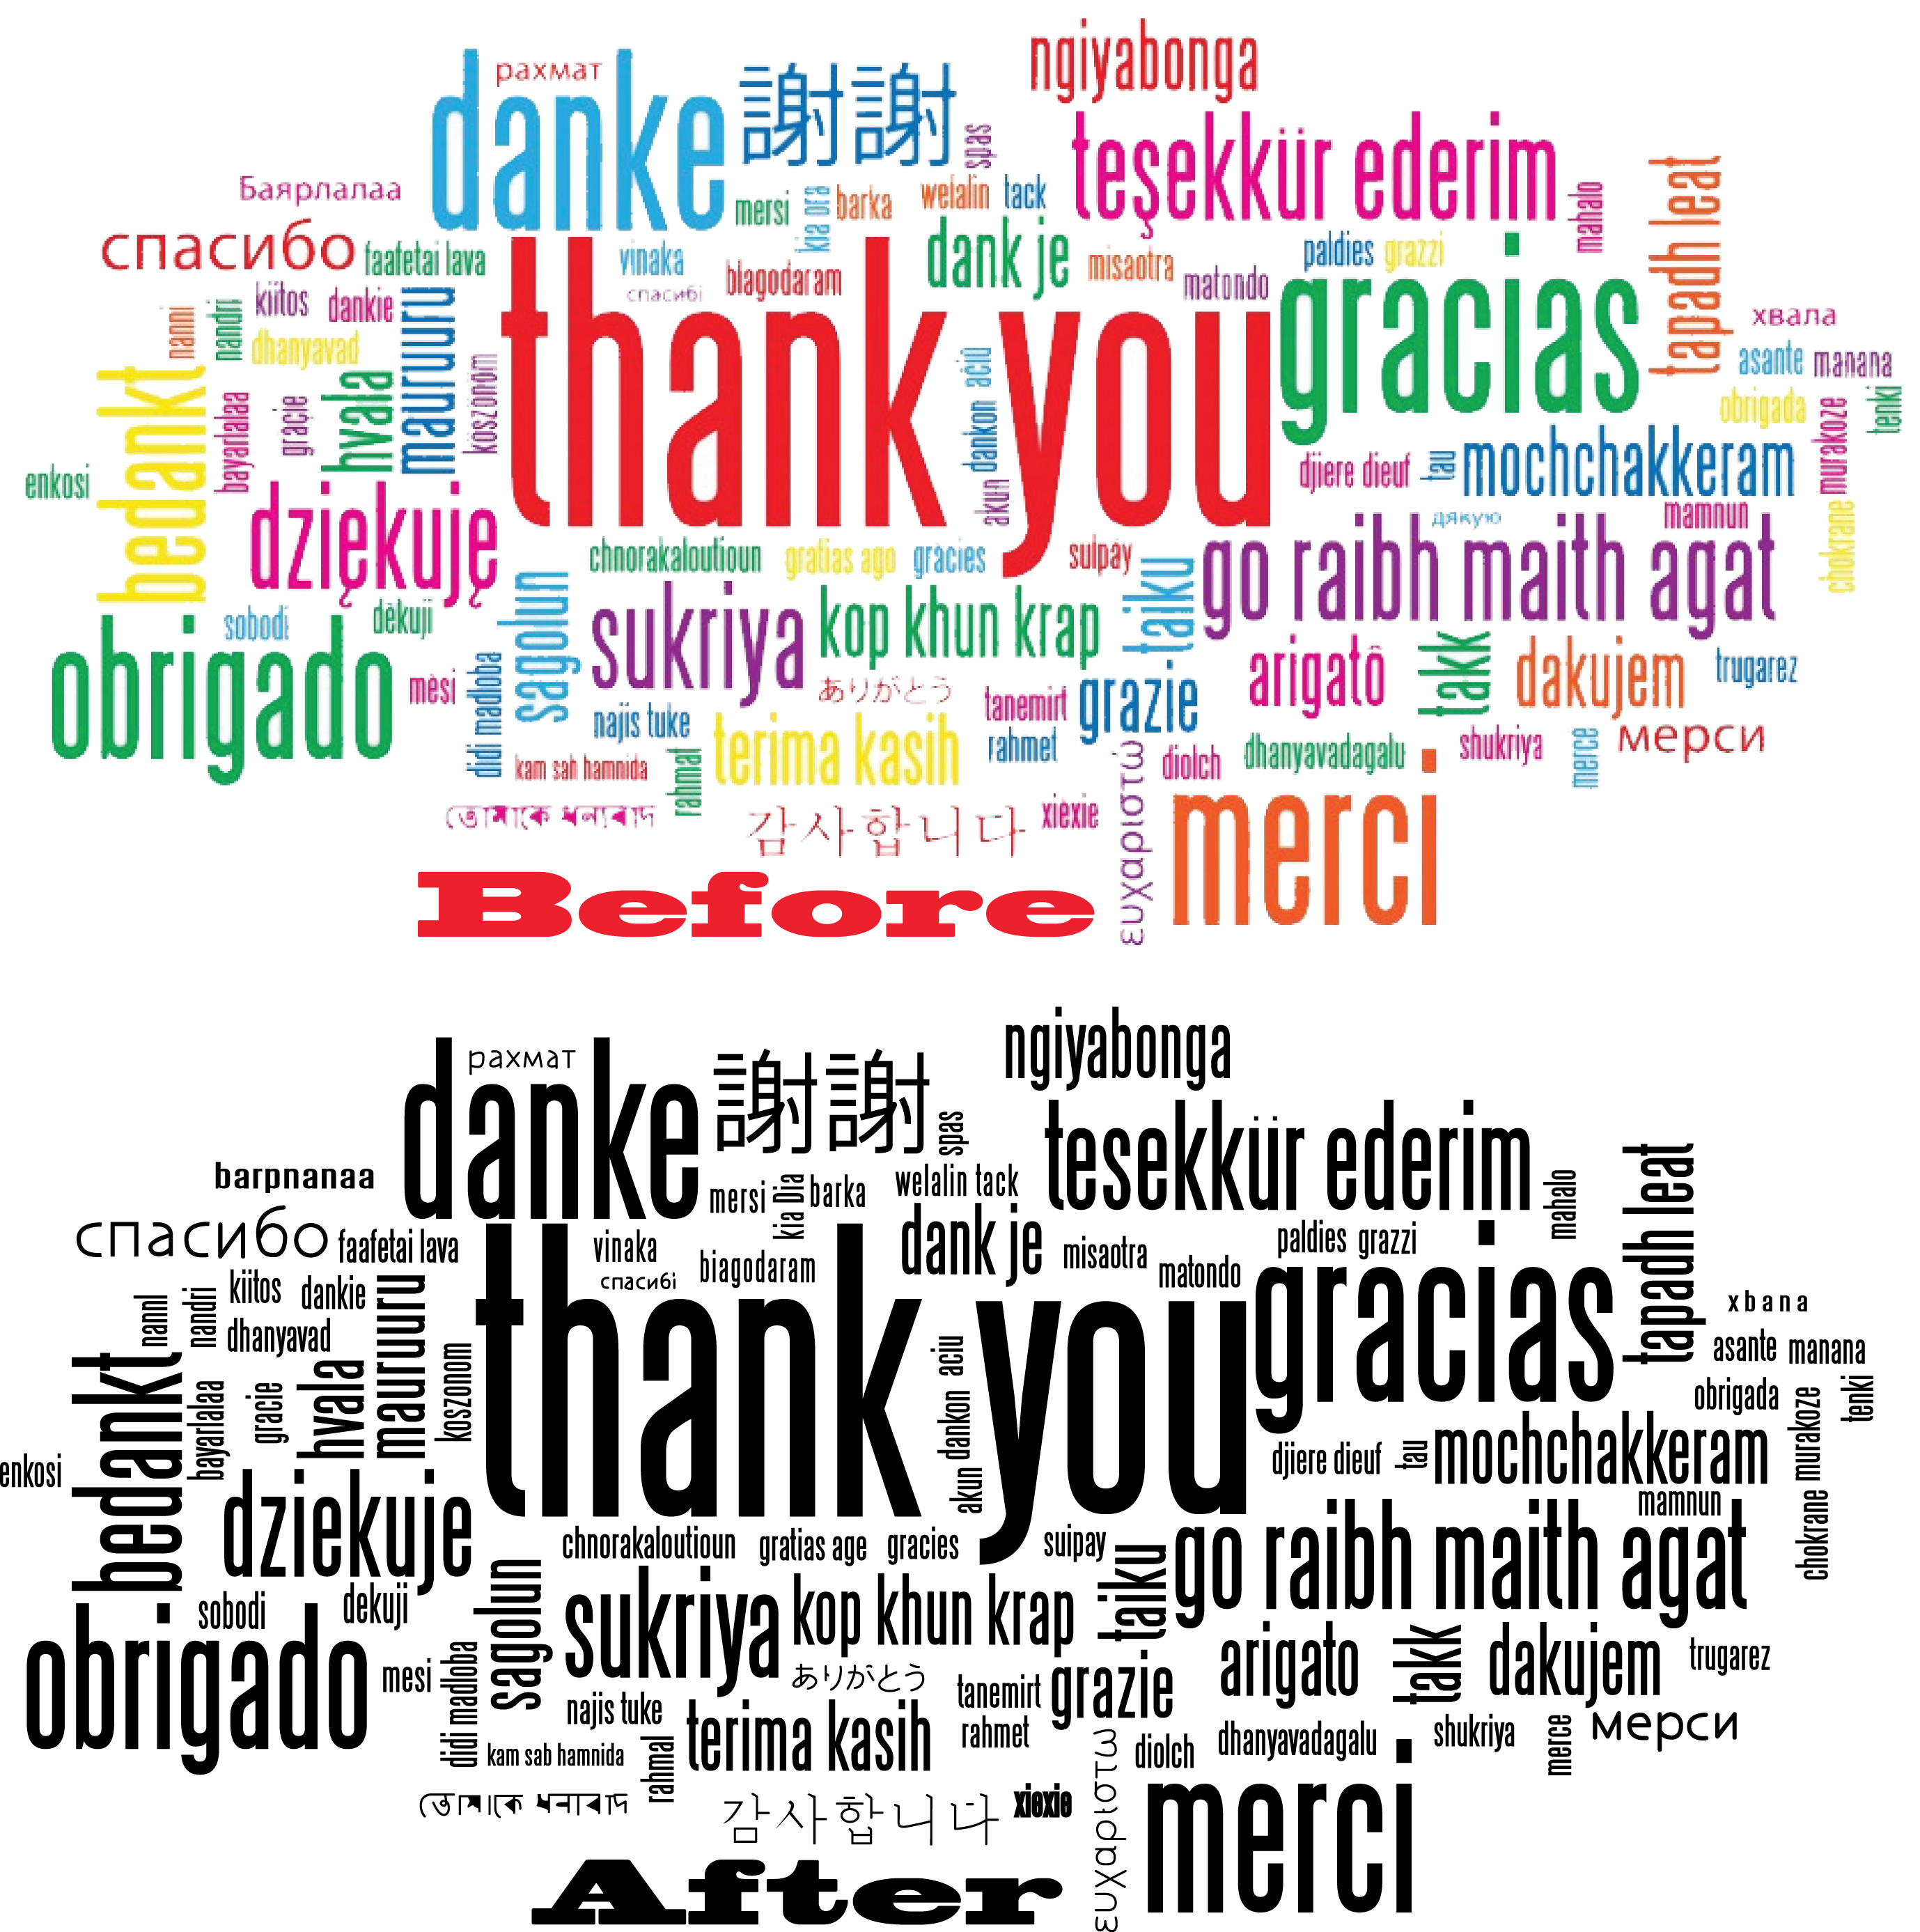 How many languages can you say Thank you in? 